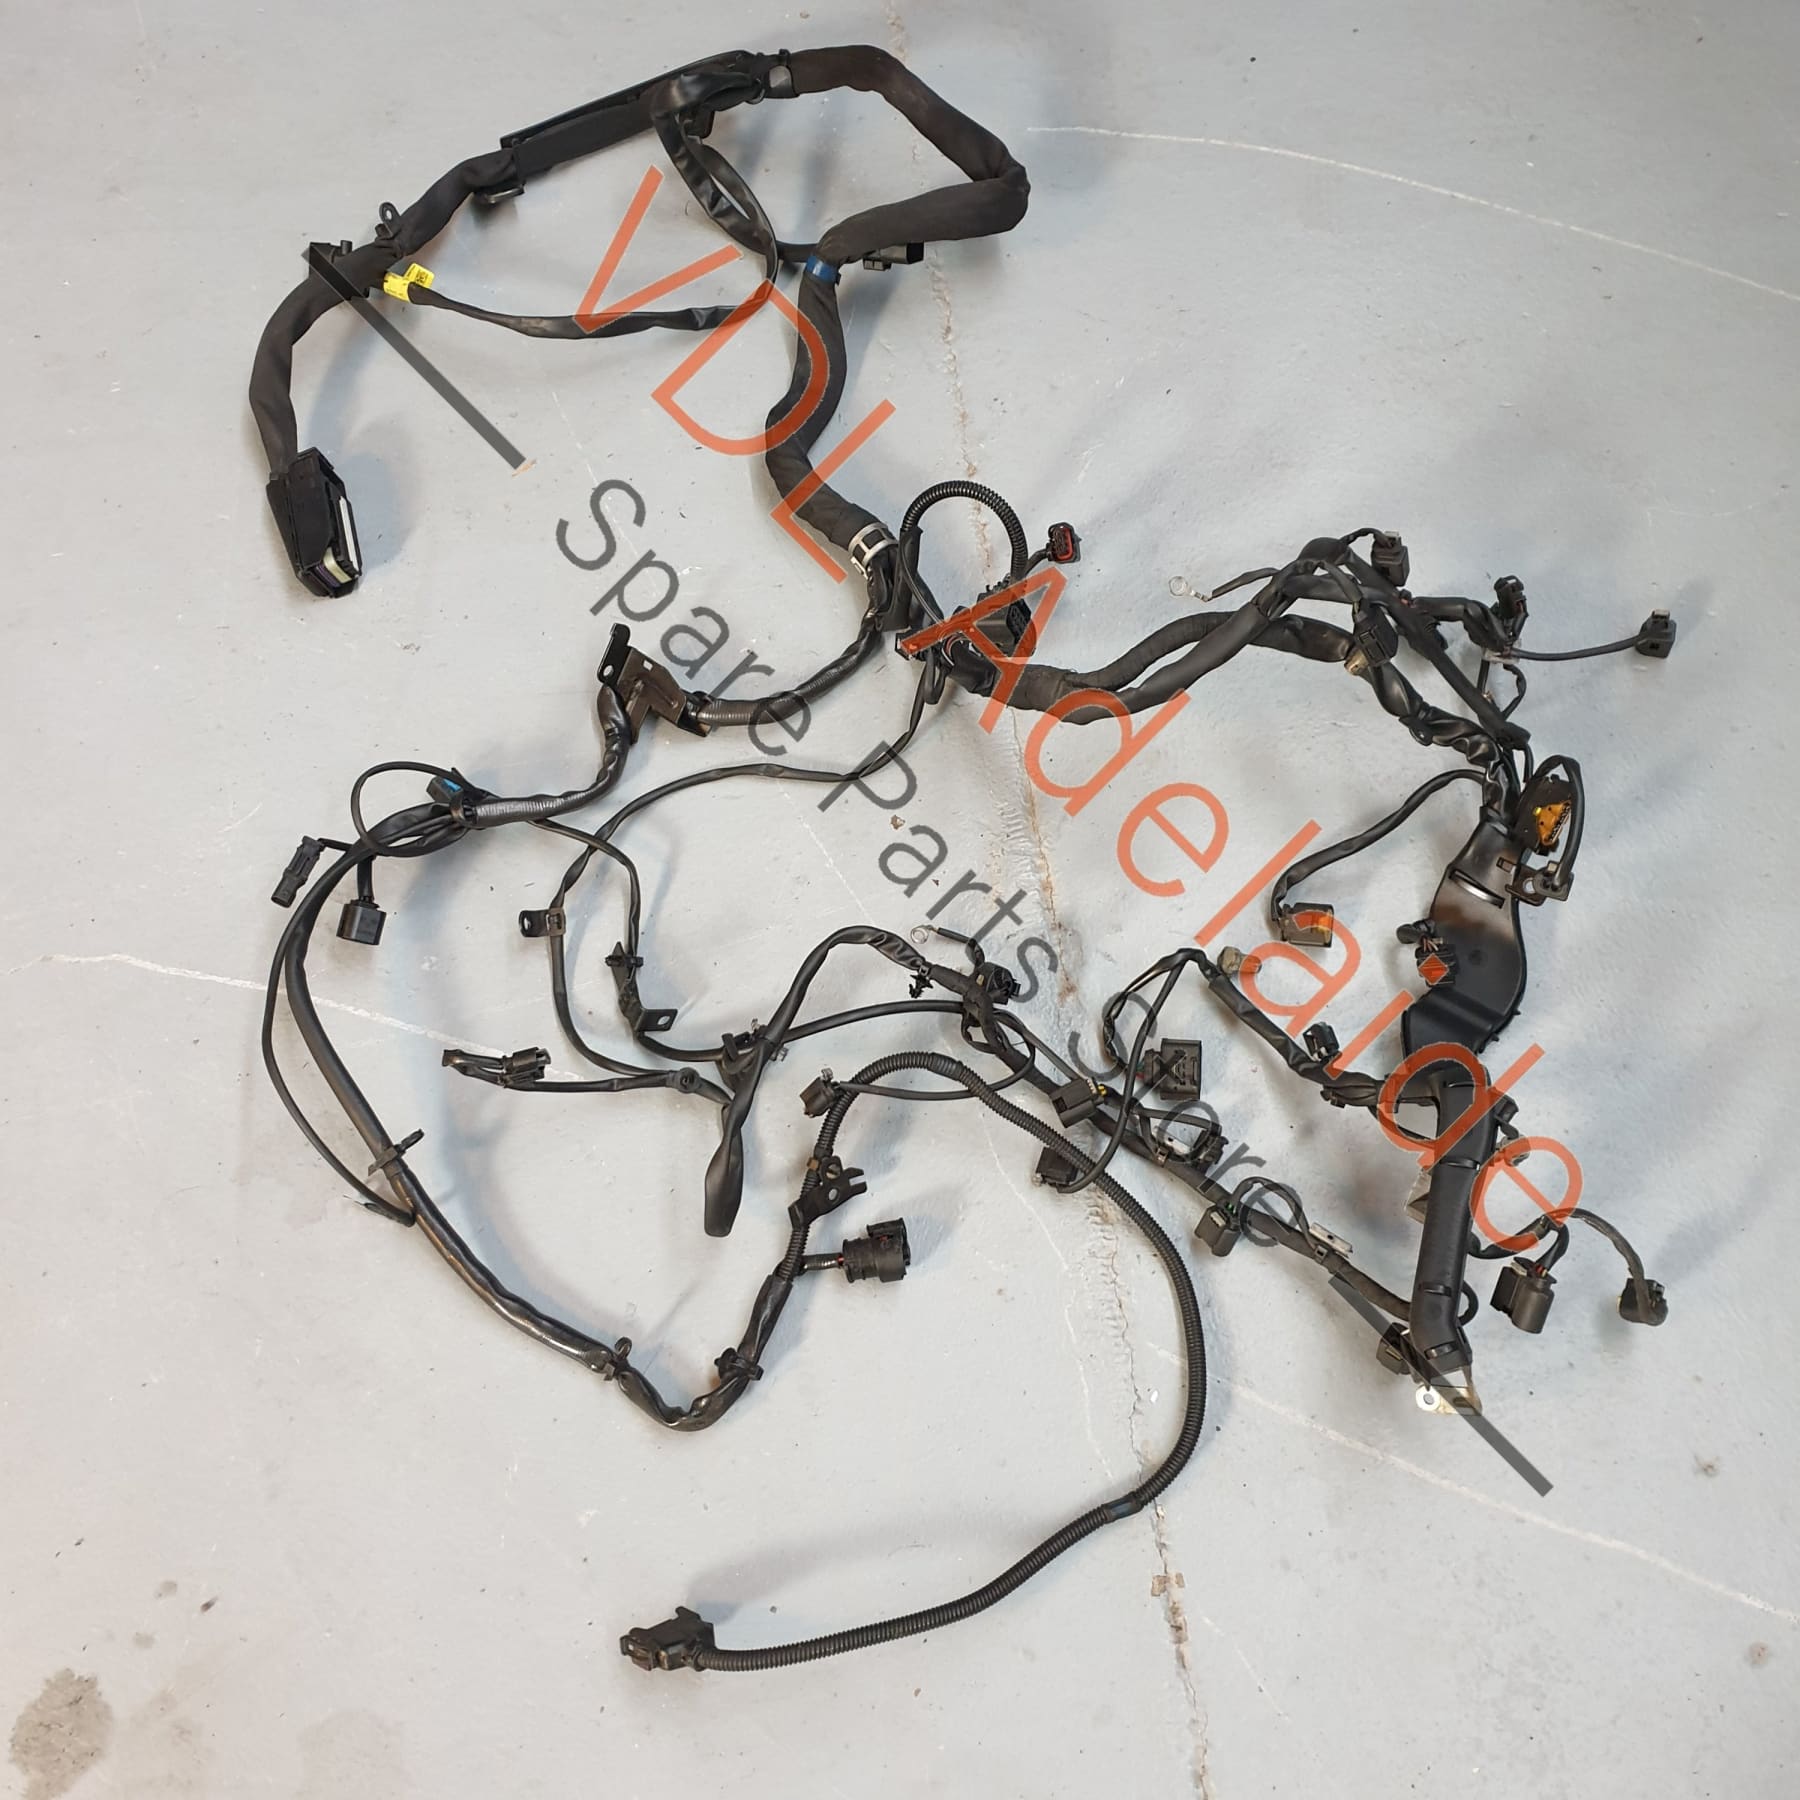 A6421500856    Mercedes W164 3.0 Diesel Engine Wiring Harness Cable A6421500856 A6421509488